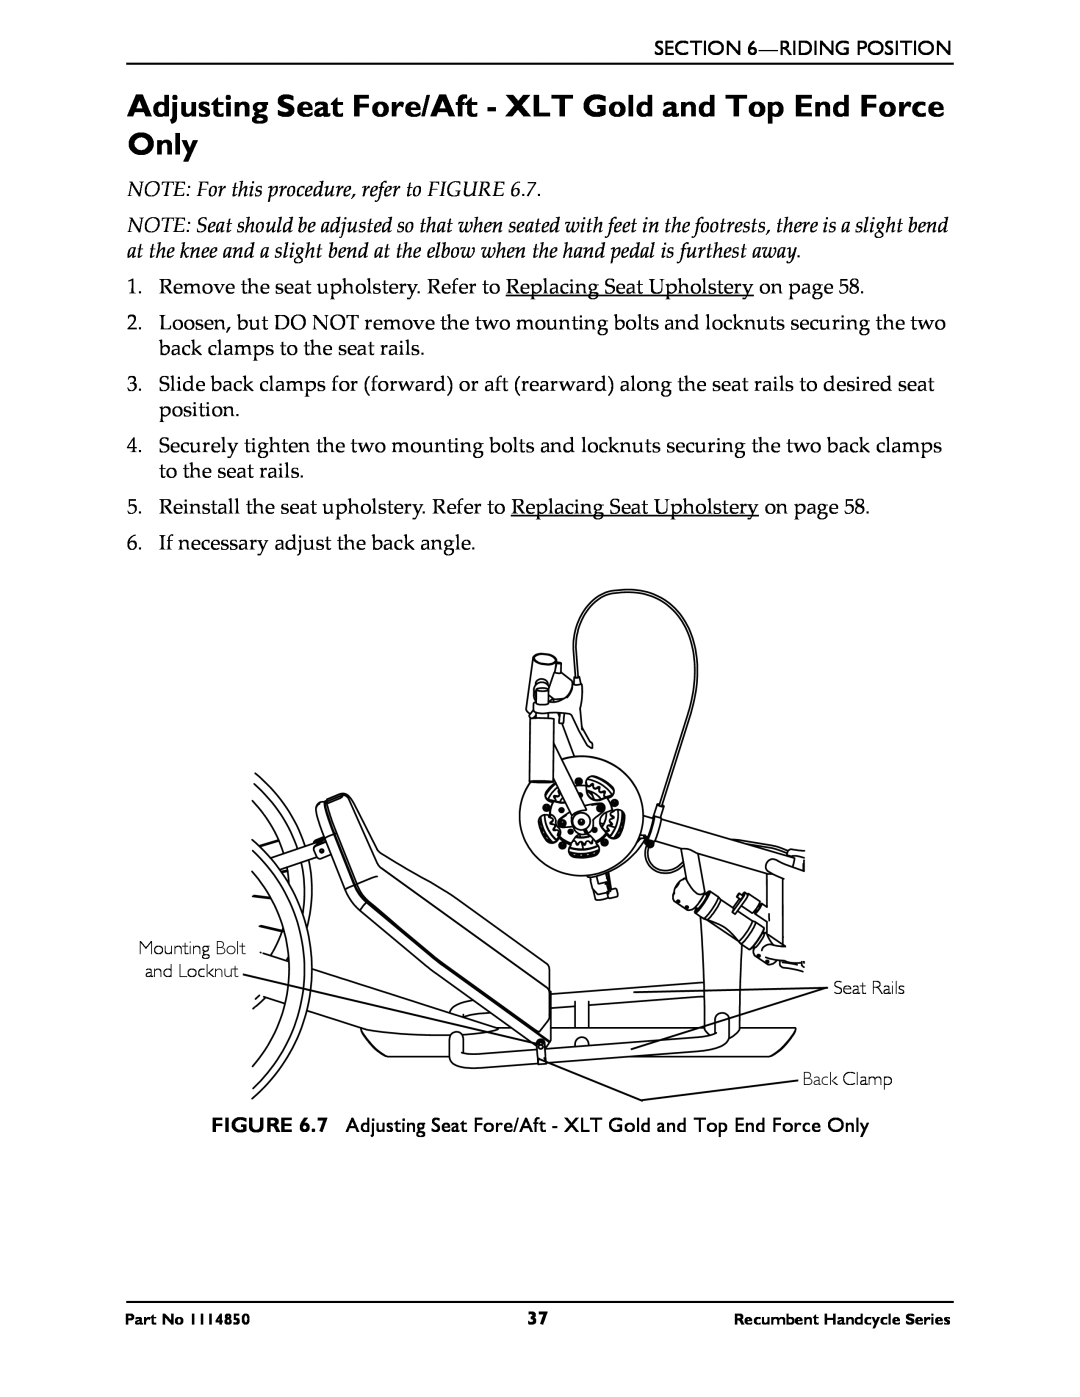 Invacare XLTPRO manual Adjusting Seat Fore/Aft - XLT Gold and Top End Force Only, NOTE For this procedure, refer to FIGURE 